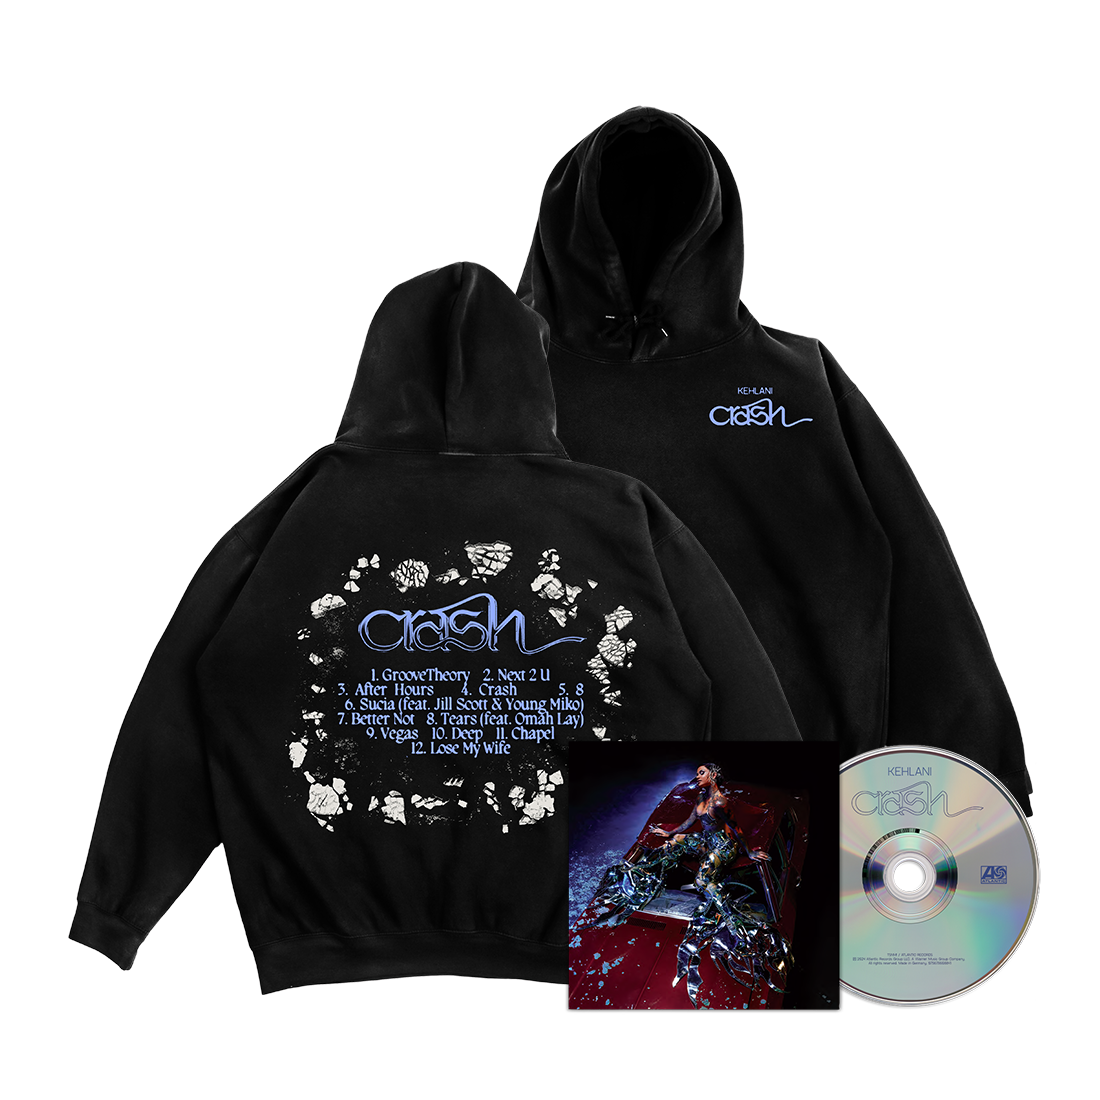 Crash Hoodie + CD with Autographed Poster